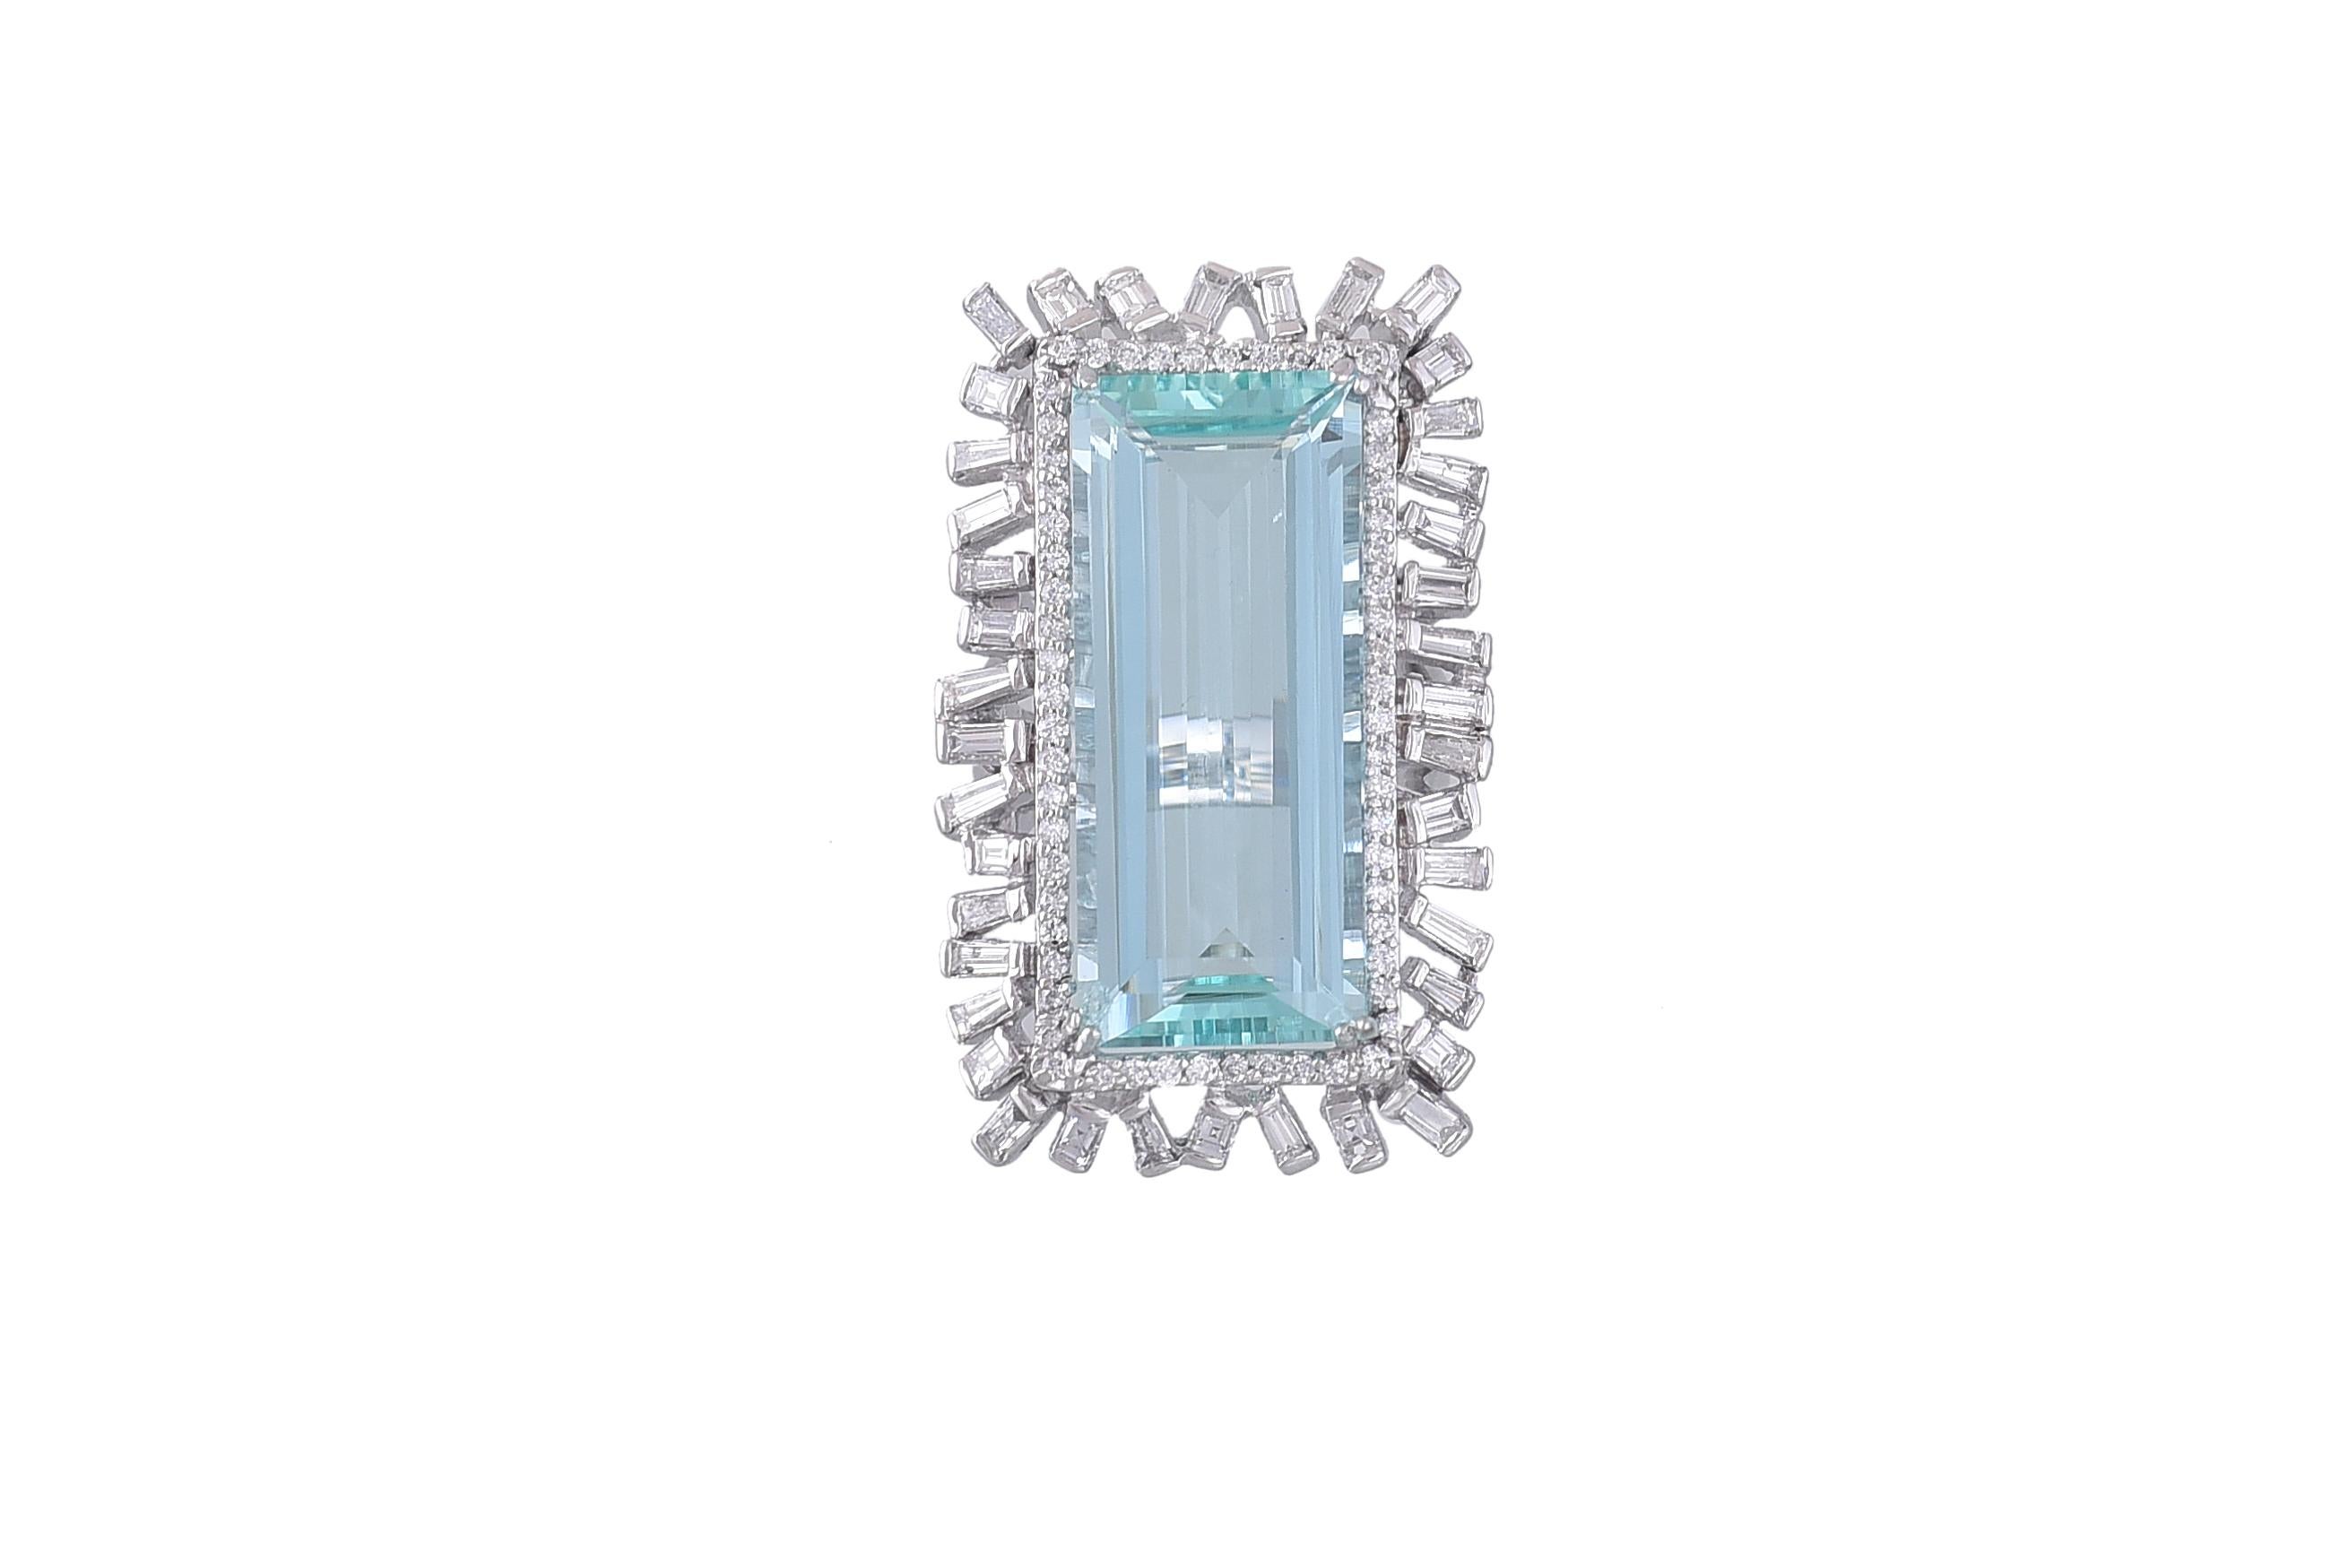 A very gorgeous and chic Aquamarine and Baguette Diamonds cocktail Ring set in 18K gold. The Aquamarine is natural and of African origin. The weight of the Aquamarine is 15.93 carats. The weight of the Baguette Diamonds is 1.80 carats. The ring is